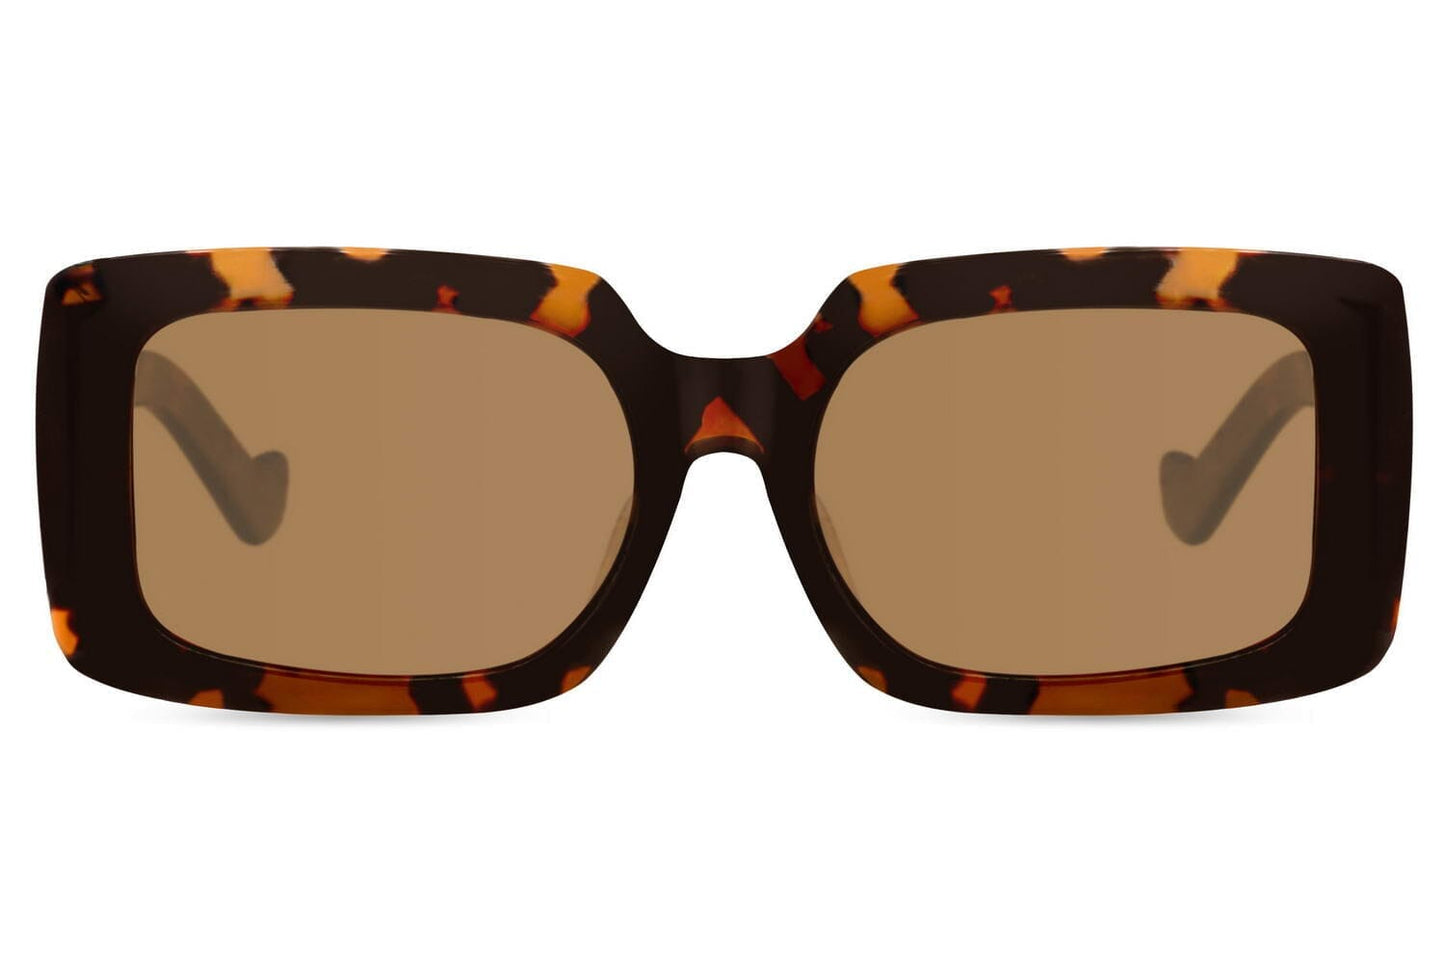 Brown rectangle sunglasses. UV400 protected.